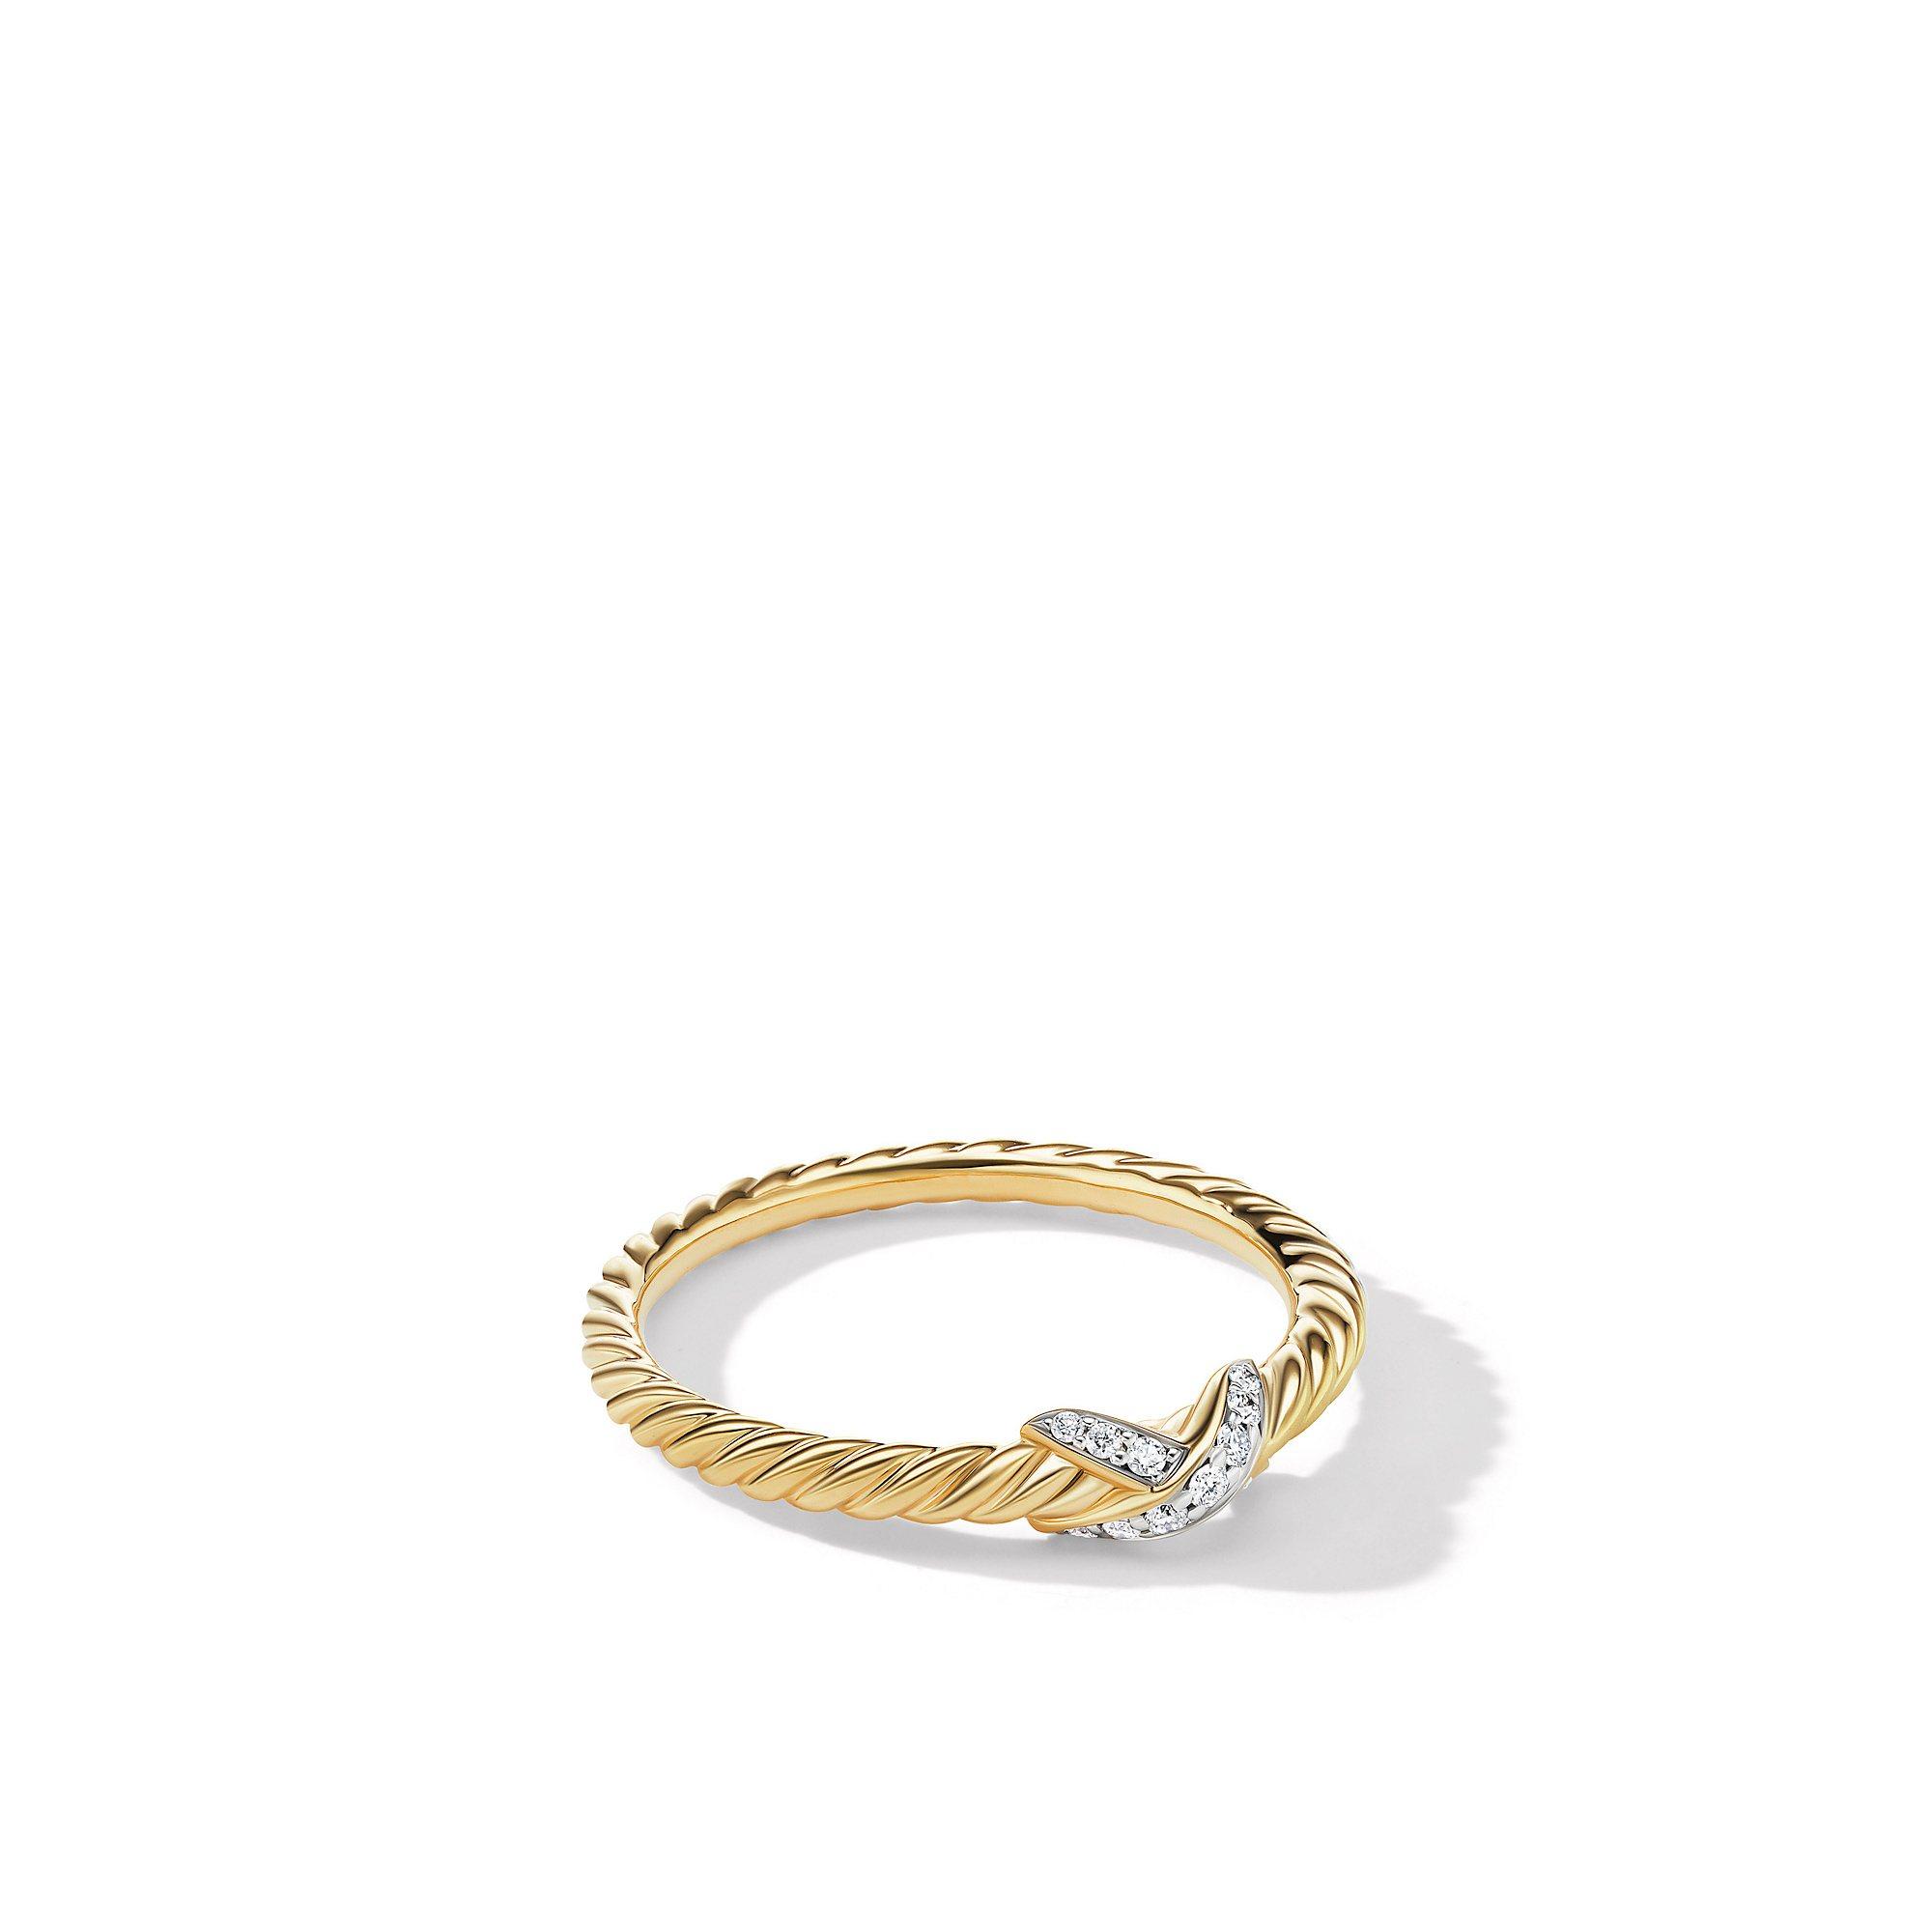 David Yurman Petite X Ring in 18K Yellow Gold with Pave Diamonds | Front View

